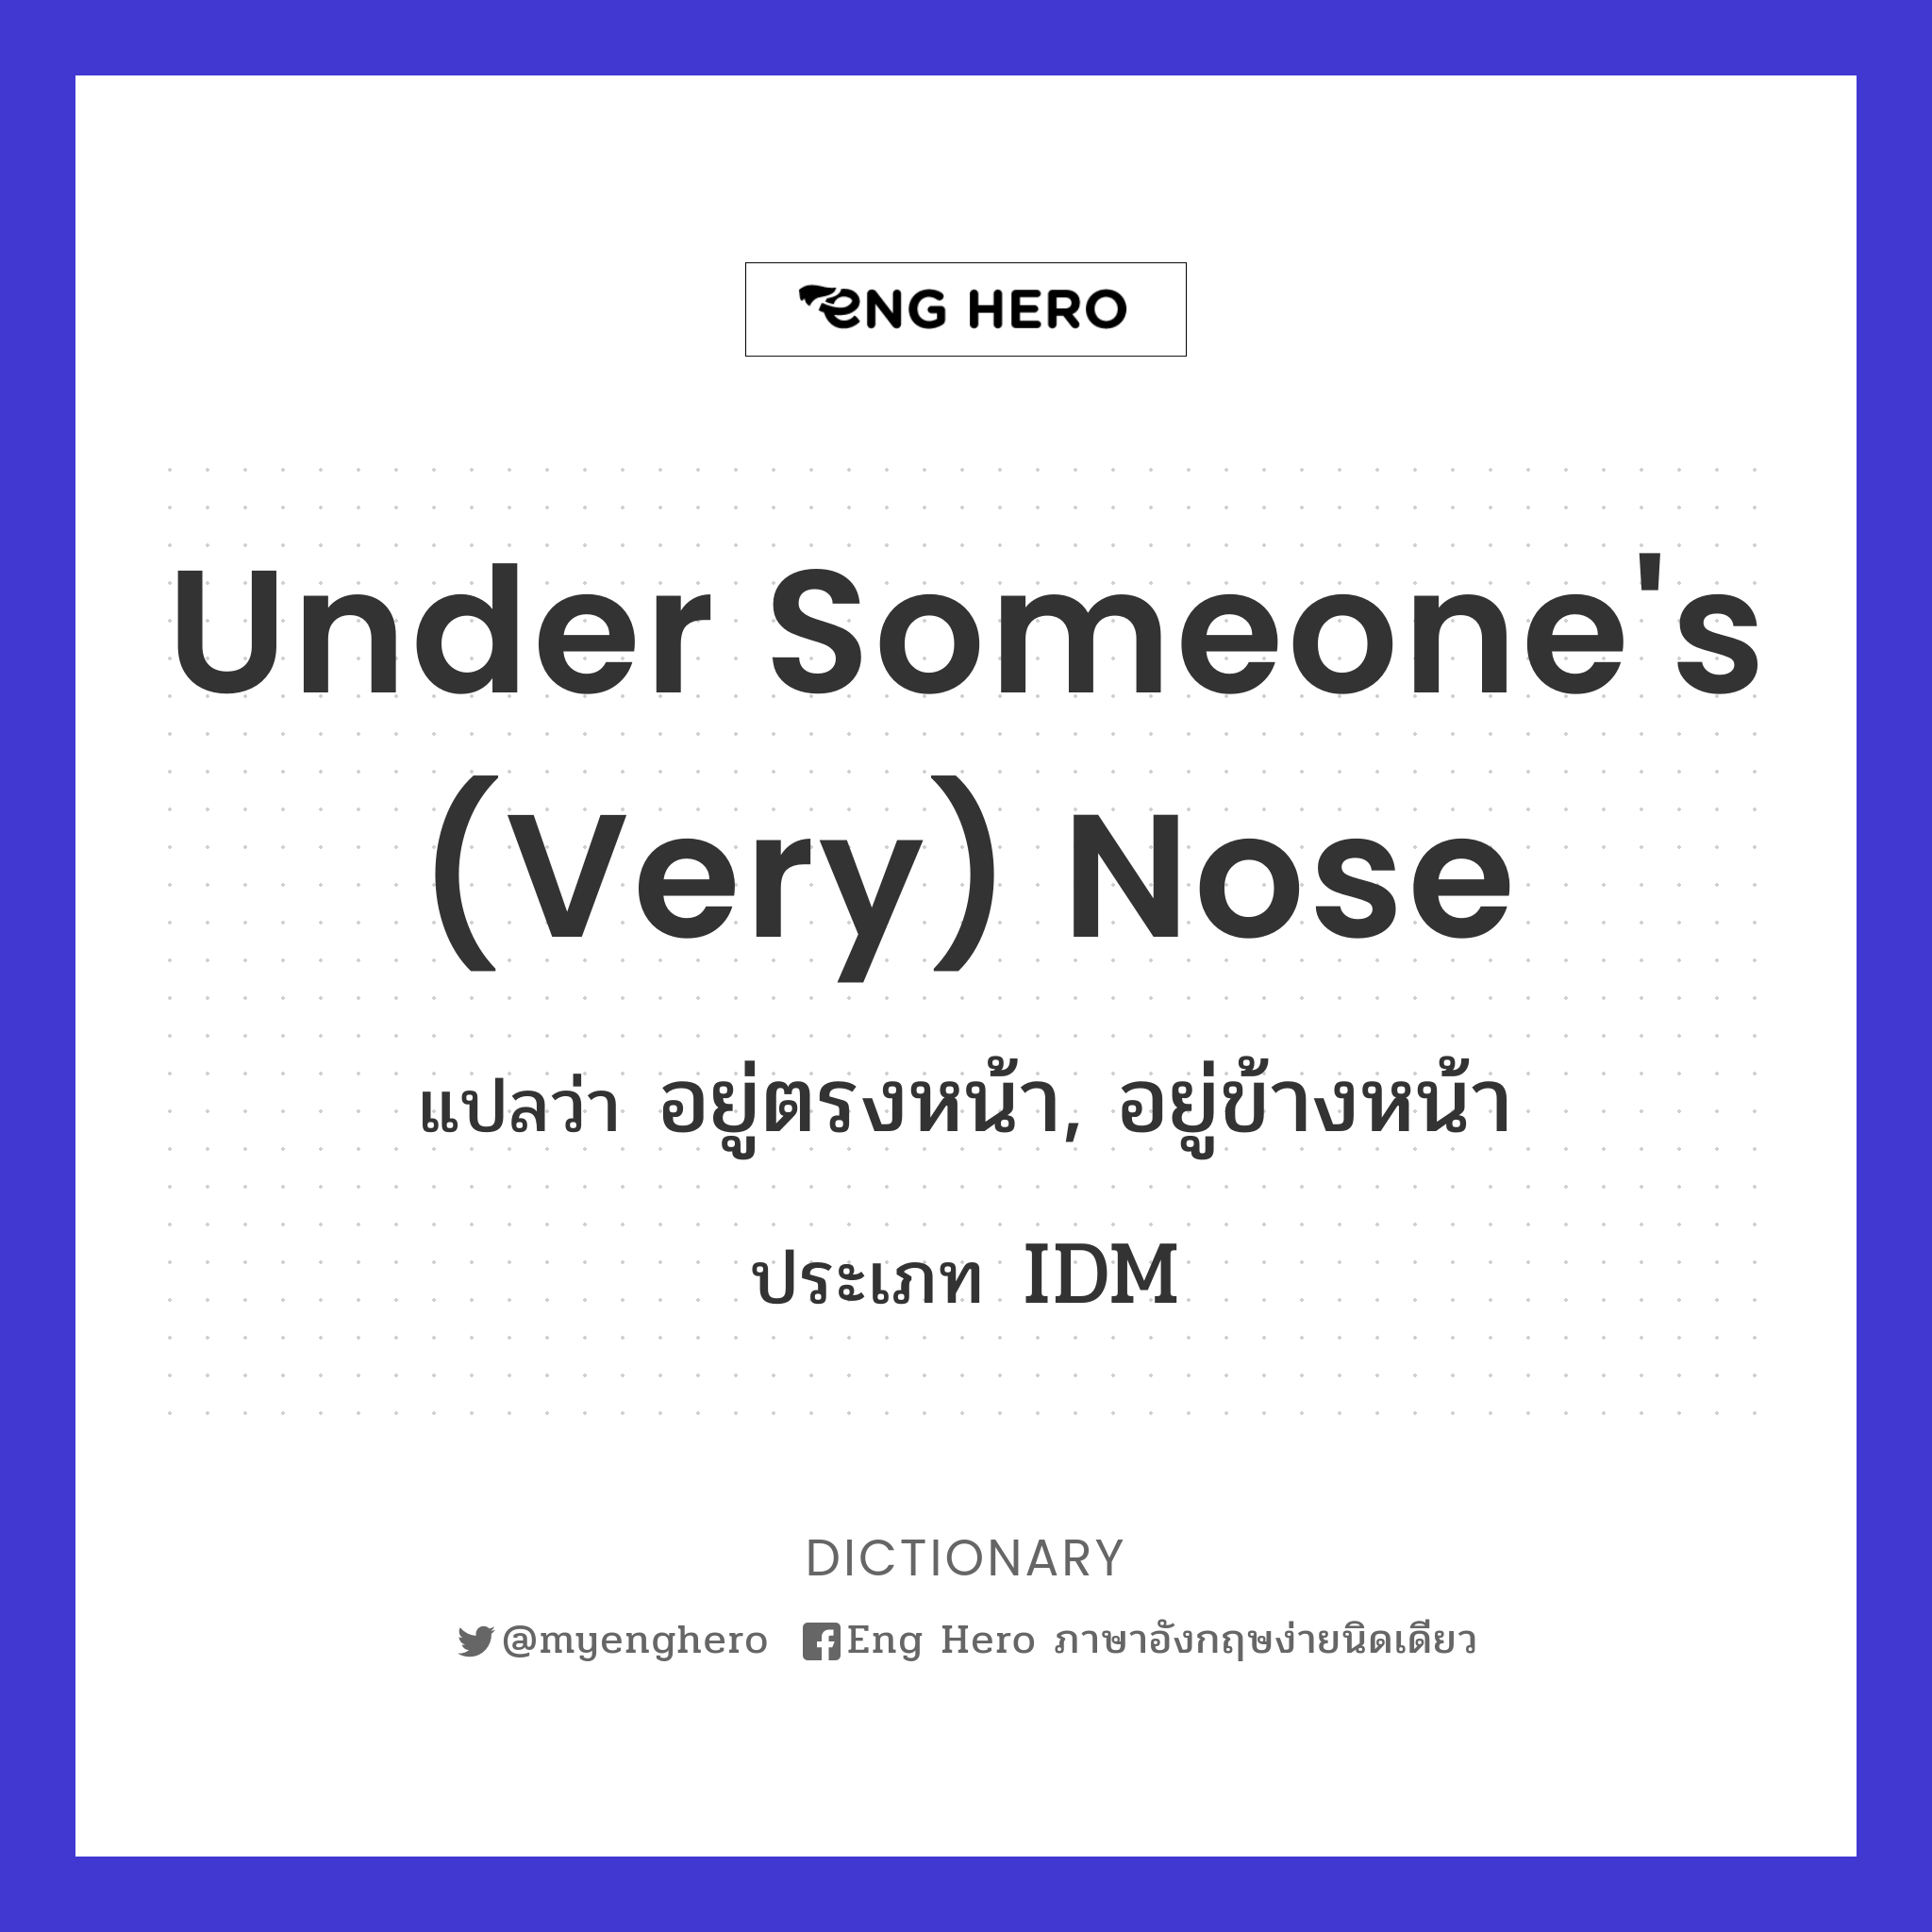 under someone's (very) nose